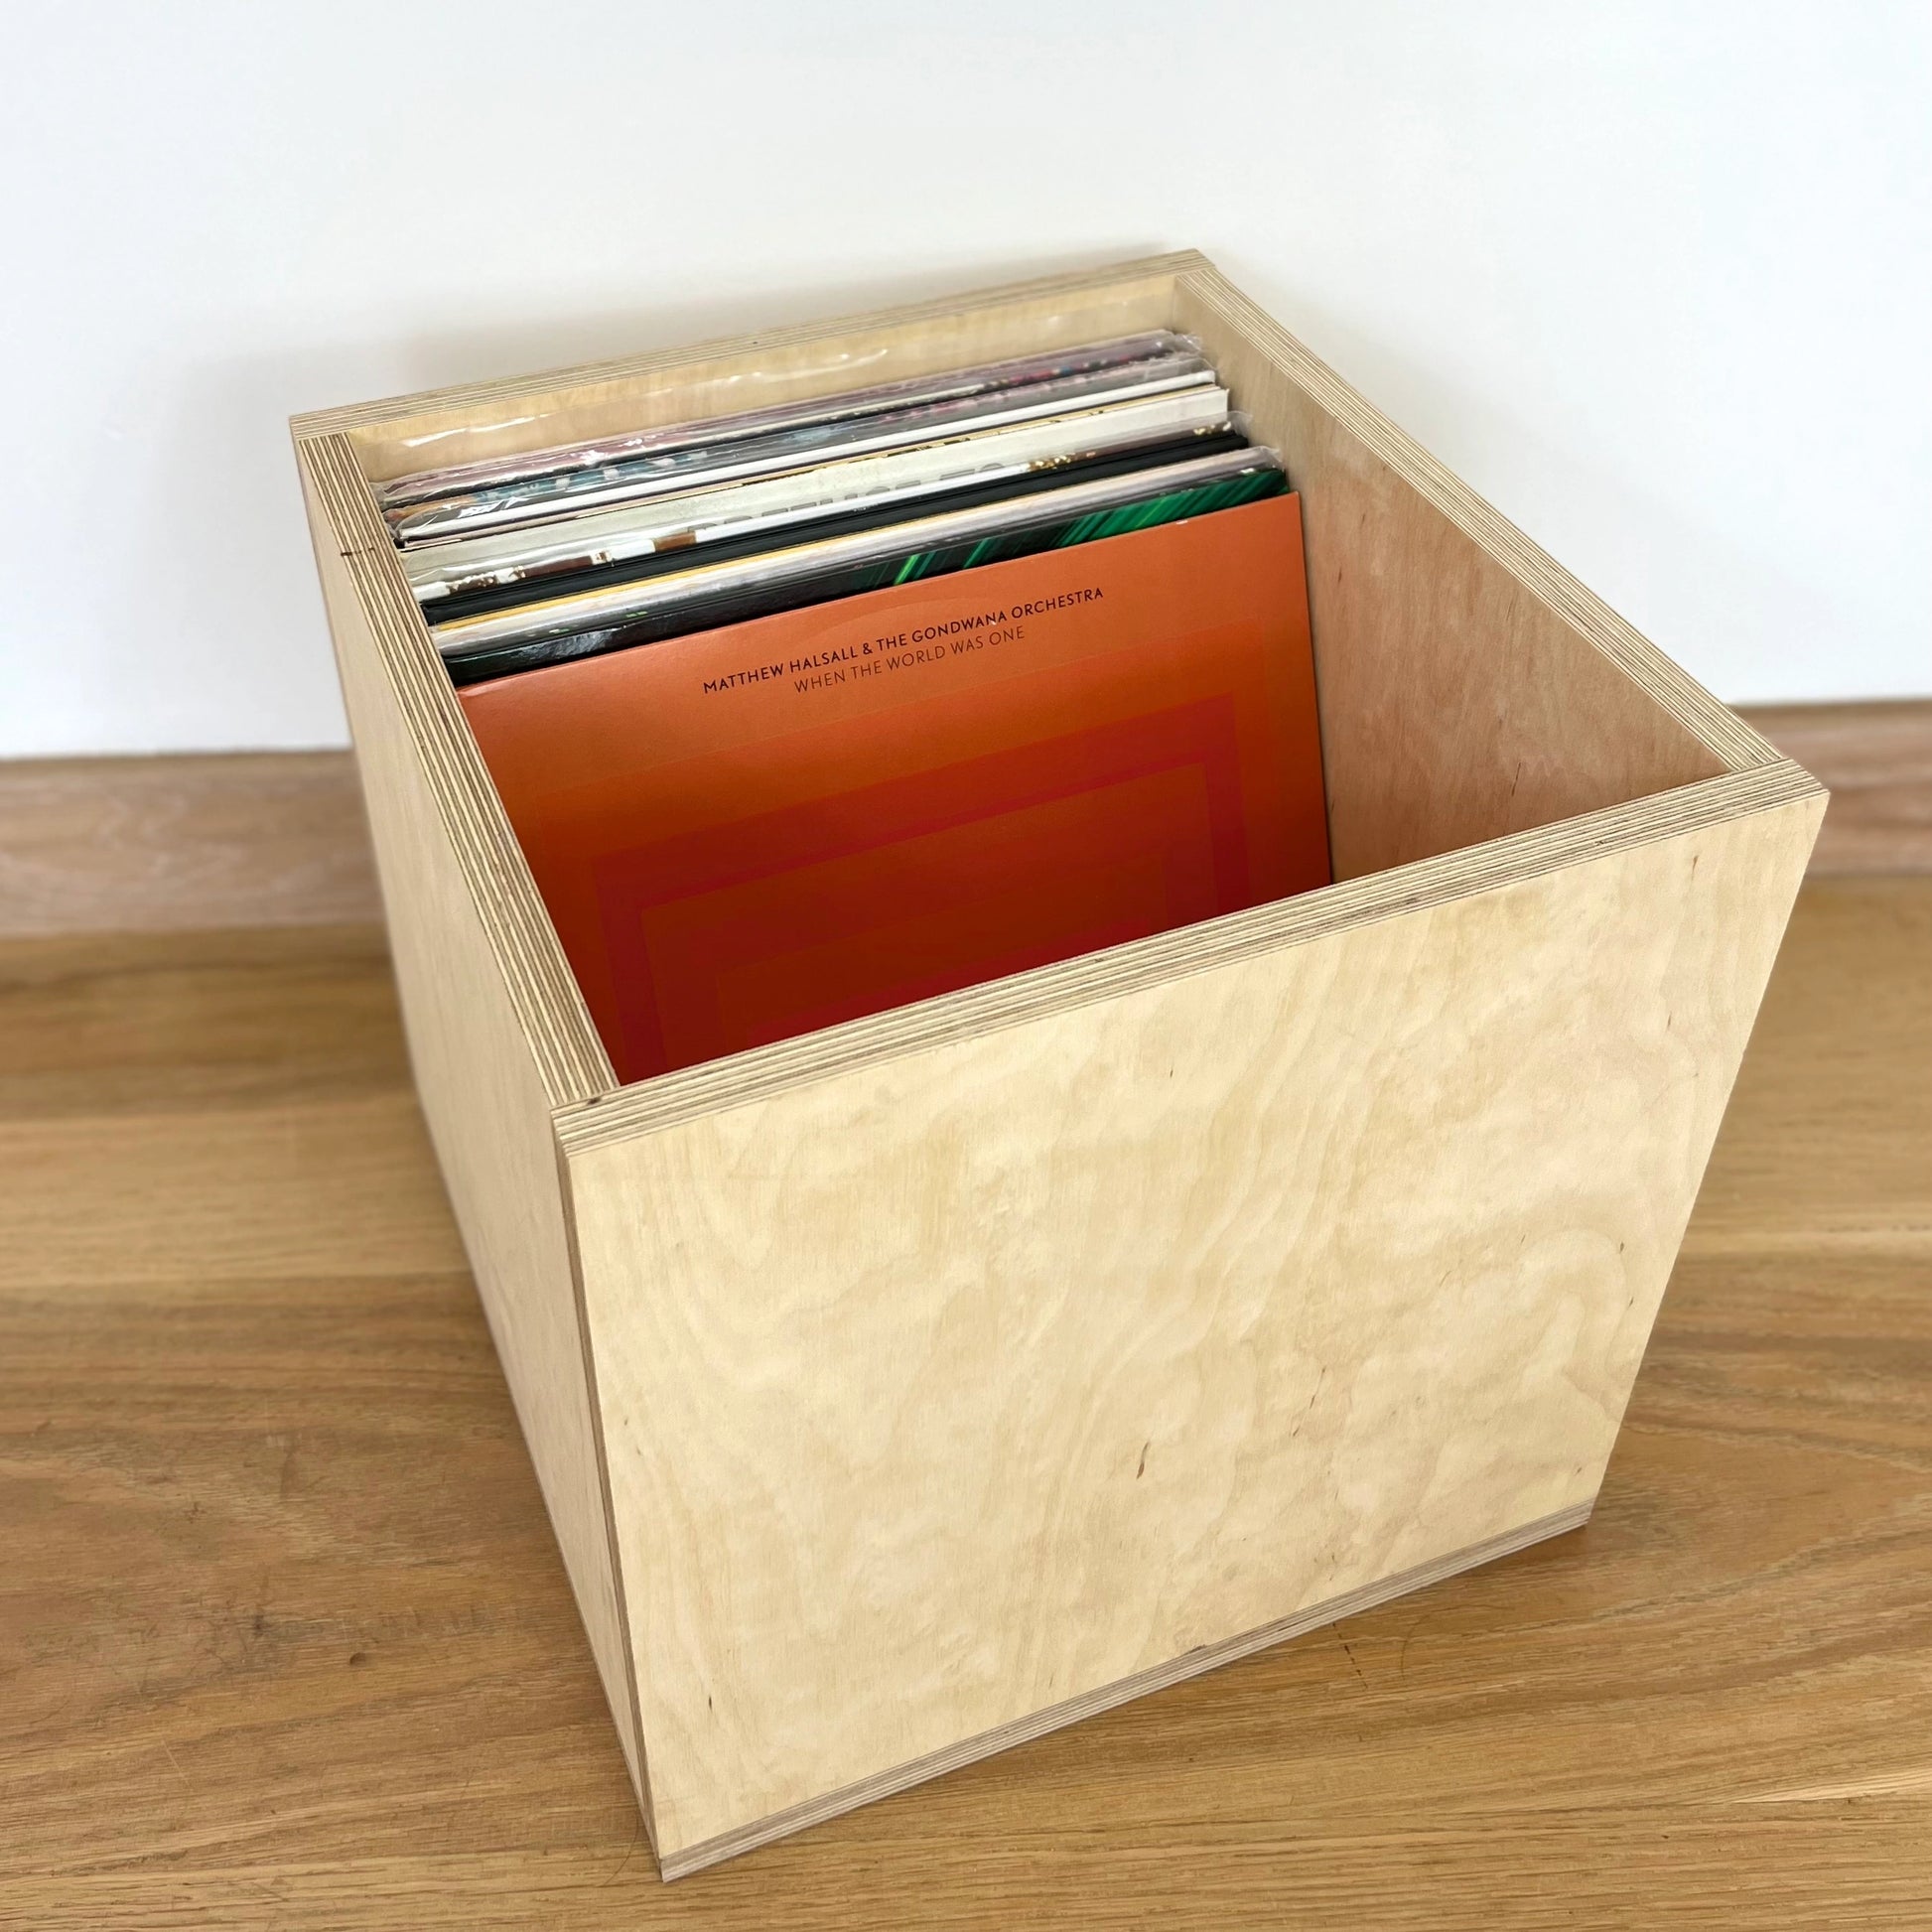 Square shaped wooden crate with pale thick side, sits facing diagonally to the right on a wooden floor. Records are displayed inside.